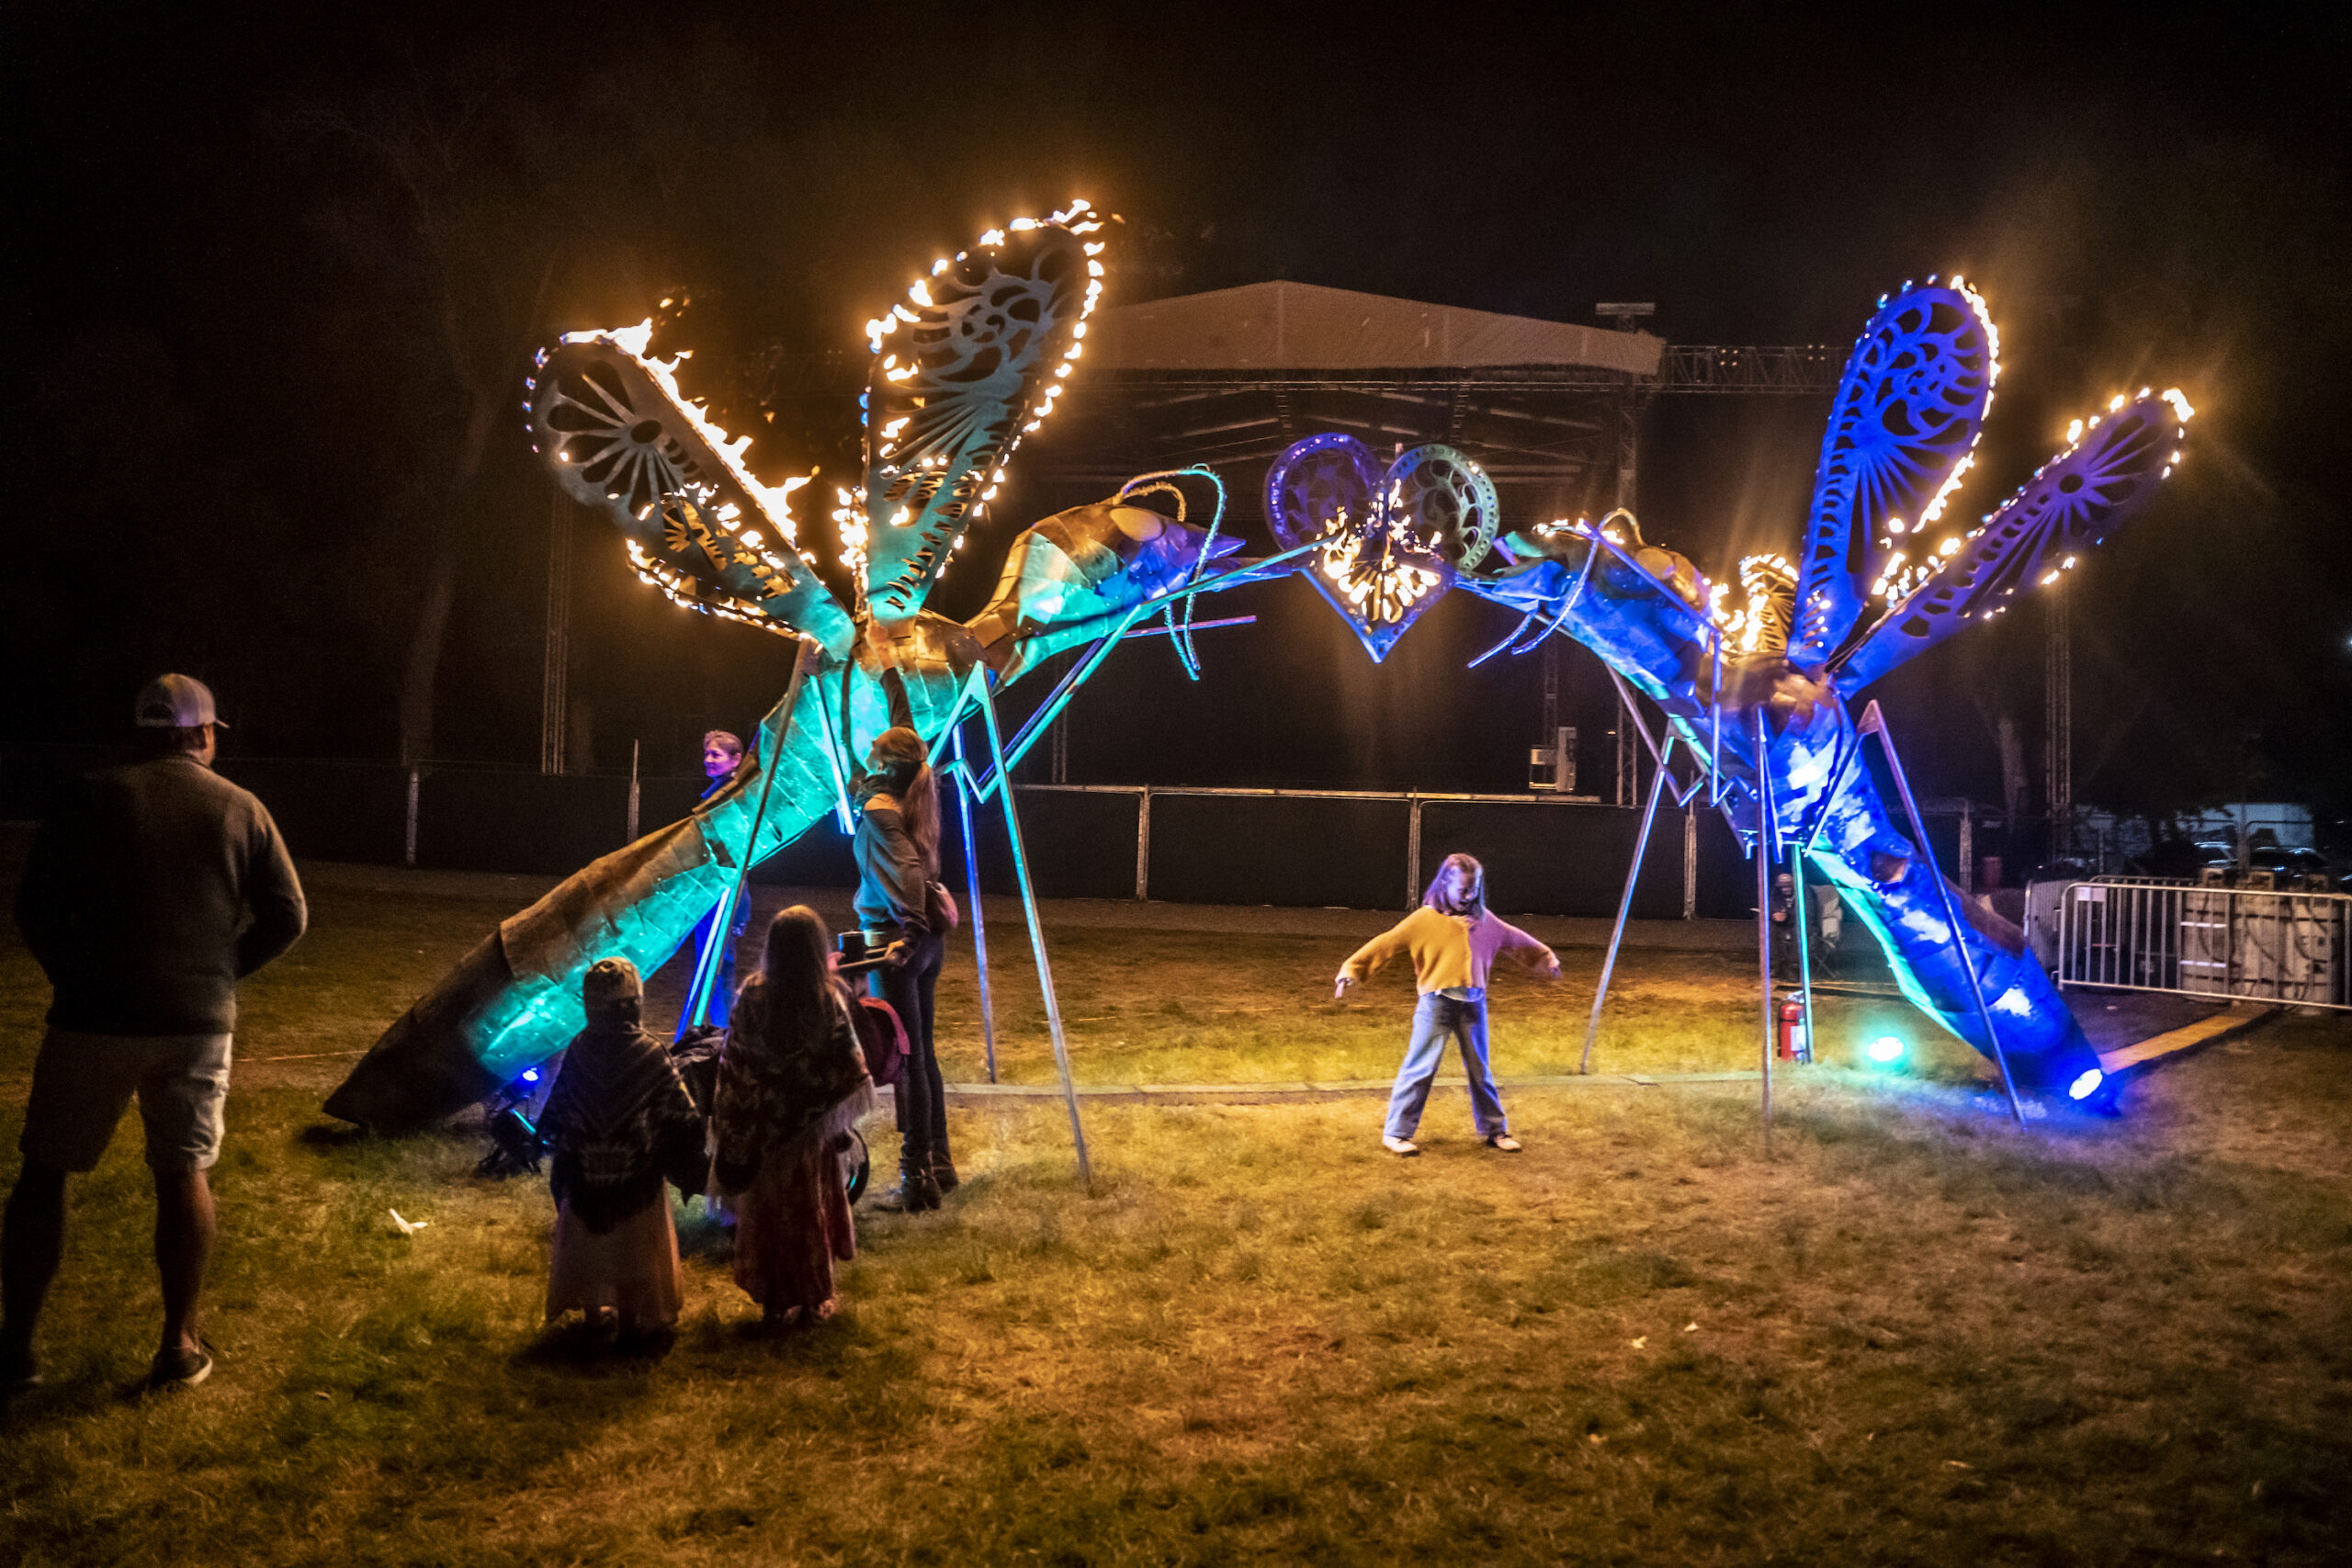 An image of two huge colorful dragonfly sculptures with a little kid standing in the middle of them.